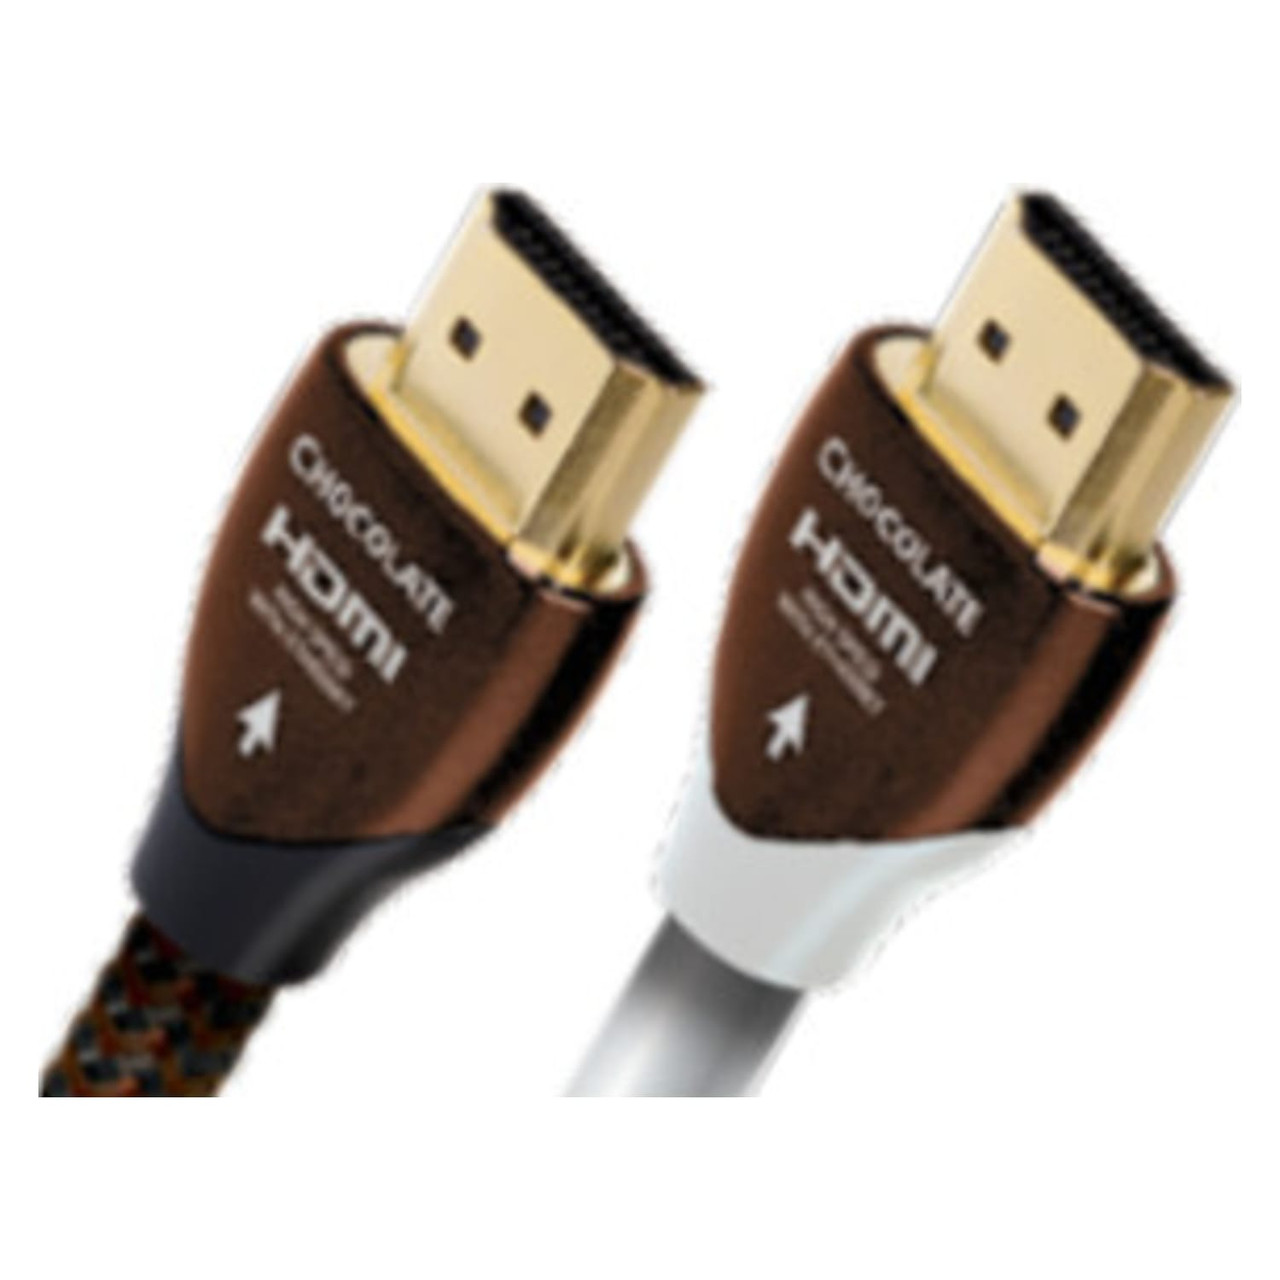 AudioQuest High Speed UHD 4K HDMI Cable - Chocolate (HDMICHO03)